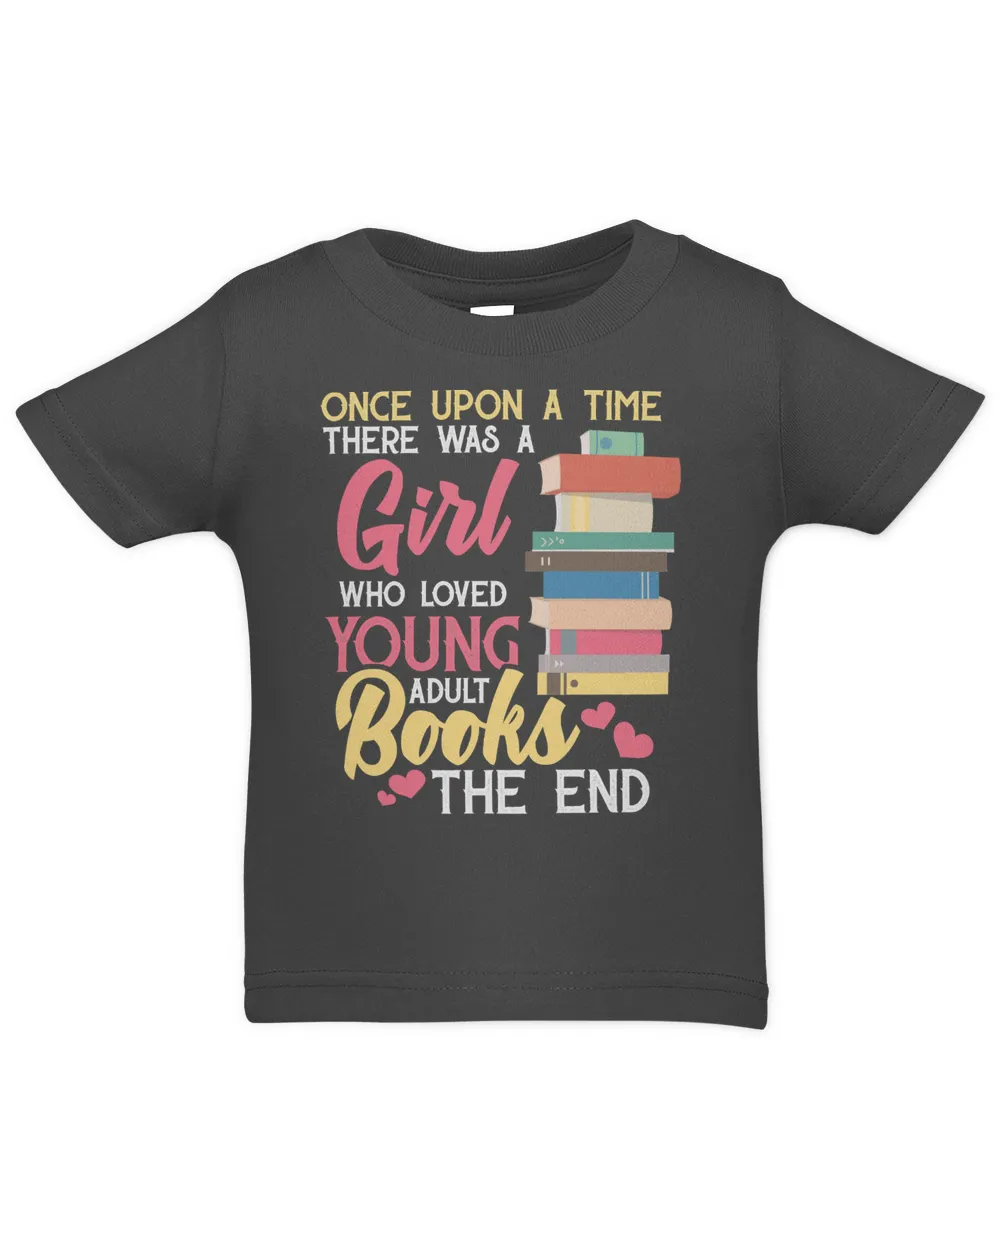 Young AdultBook Lover Librarian 2 Book Reader